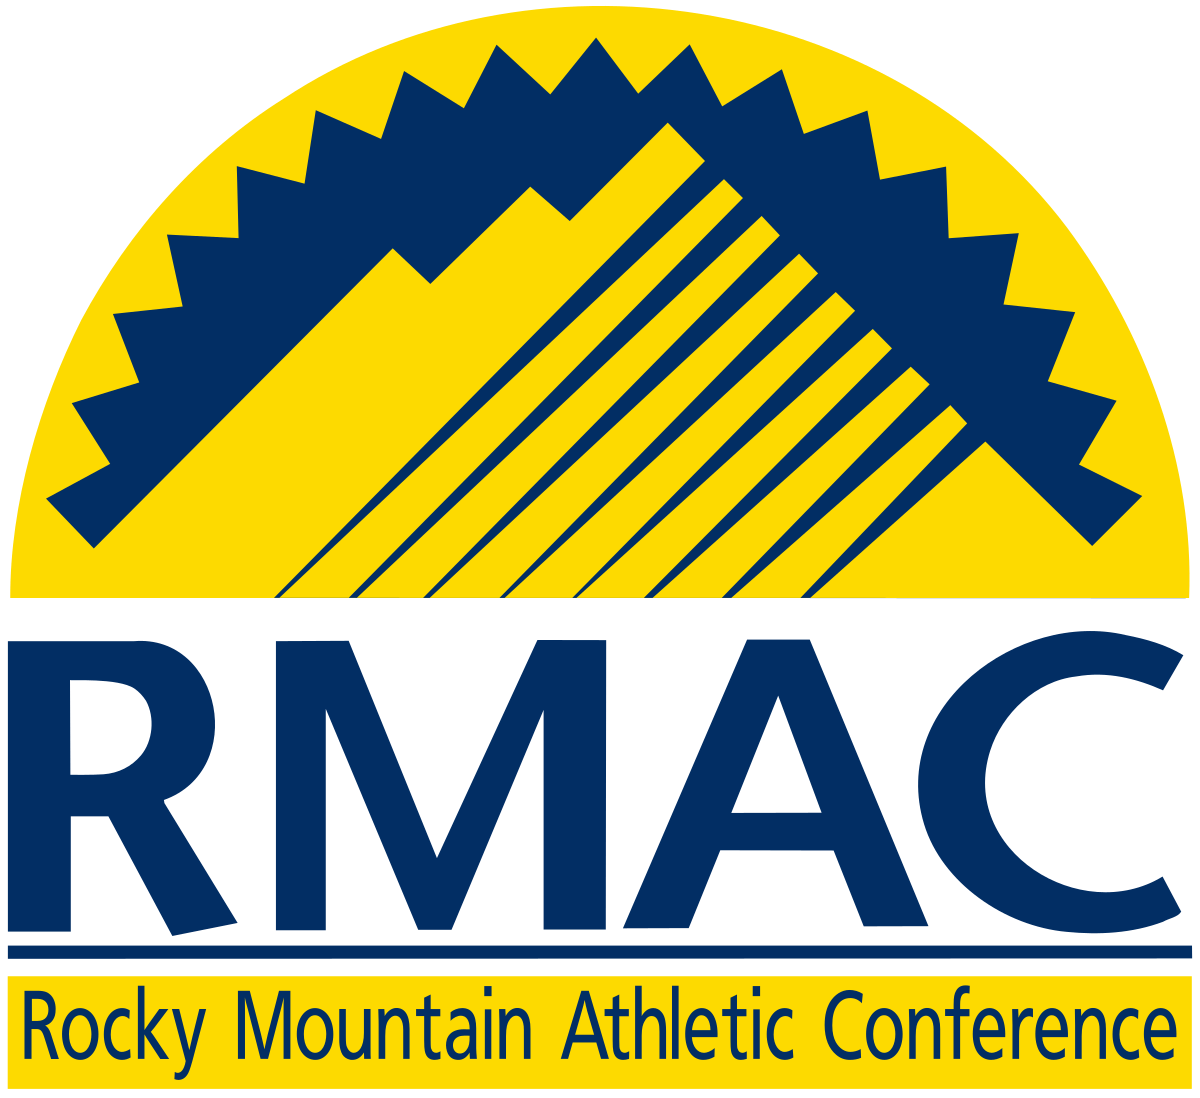 RMAC Logo - Rocky Mountain Athletic Conference